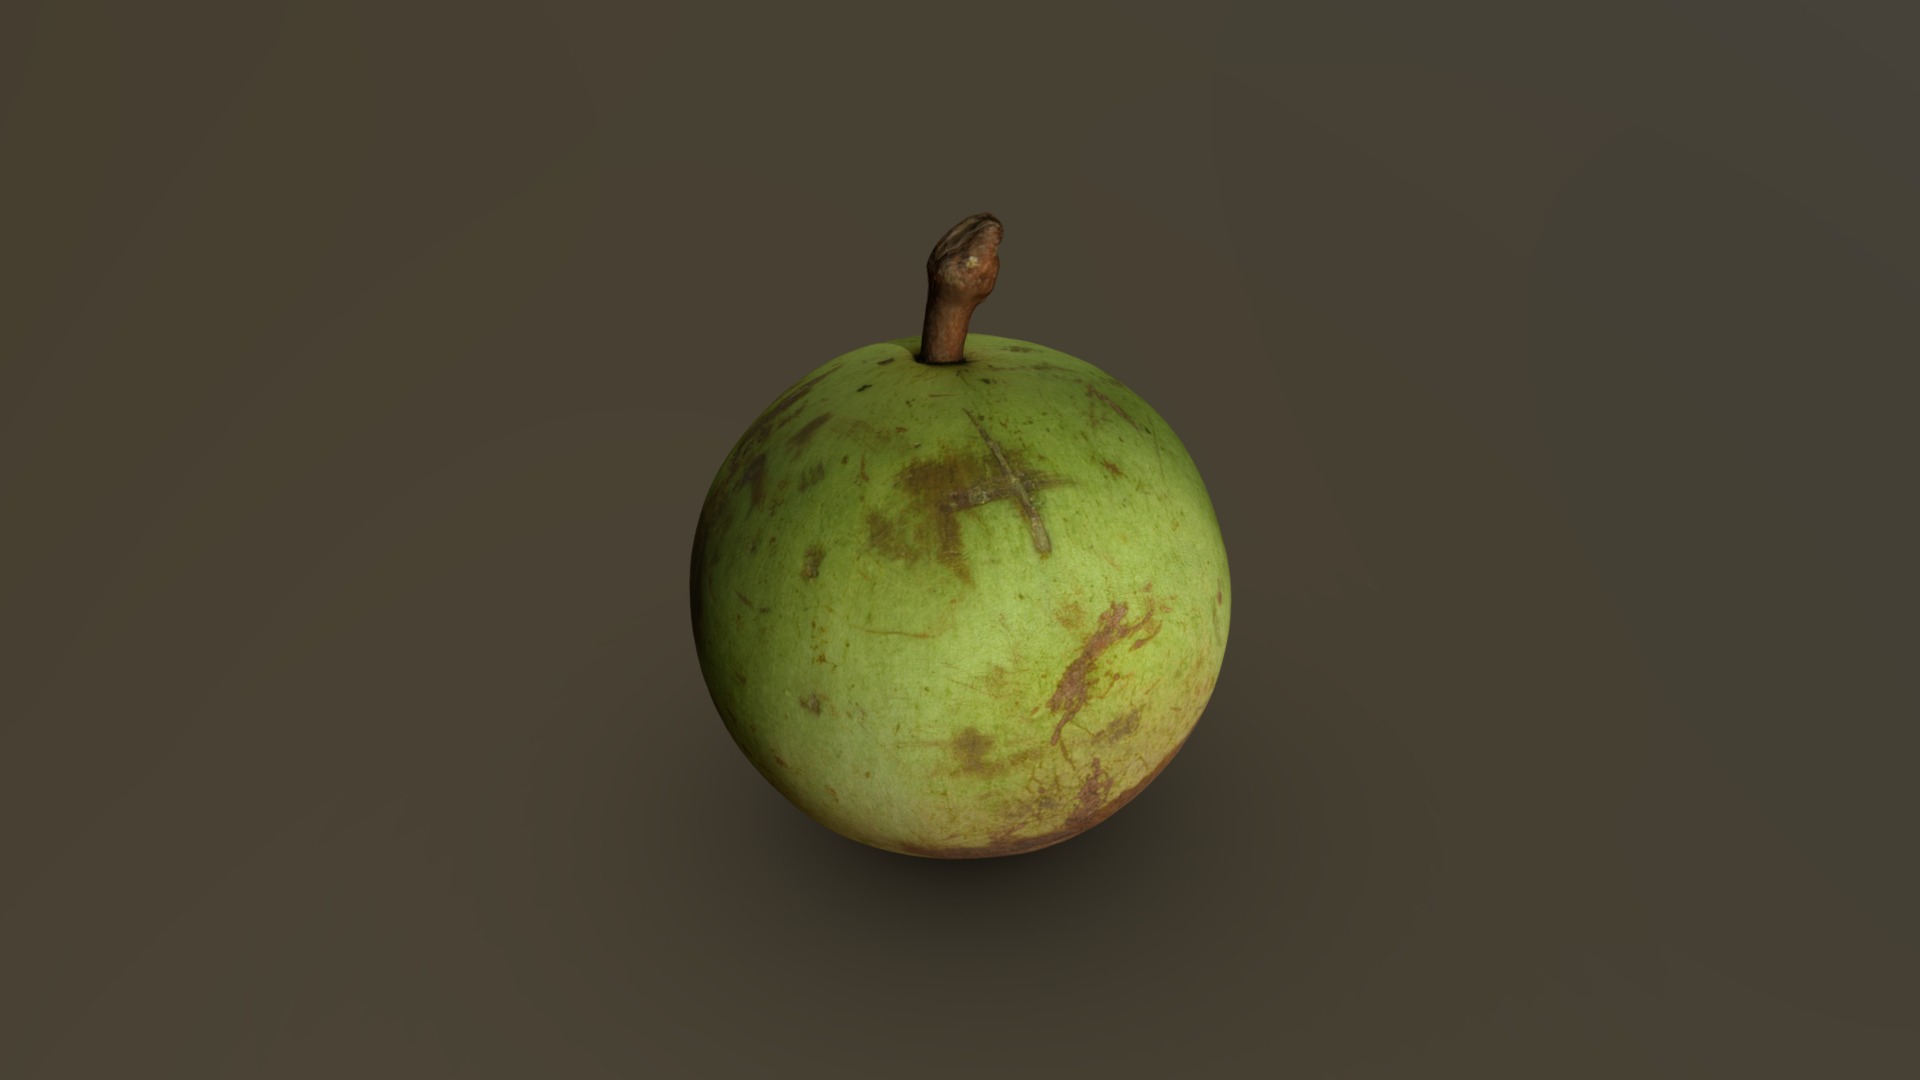 3D model Star Apple 01 - This is a 3D model of the Star Apple 01. The 3D model is about a green pear on a black background.